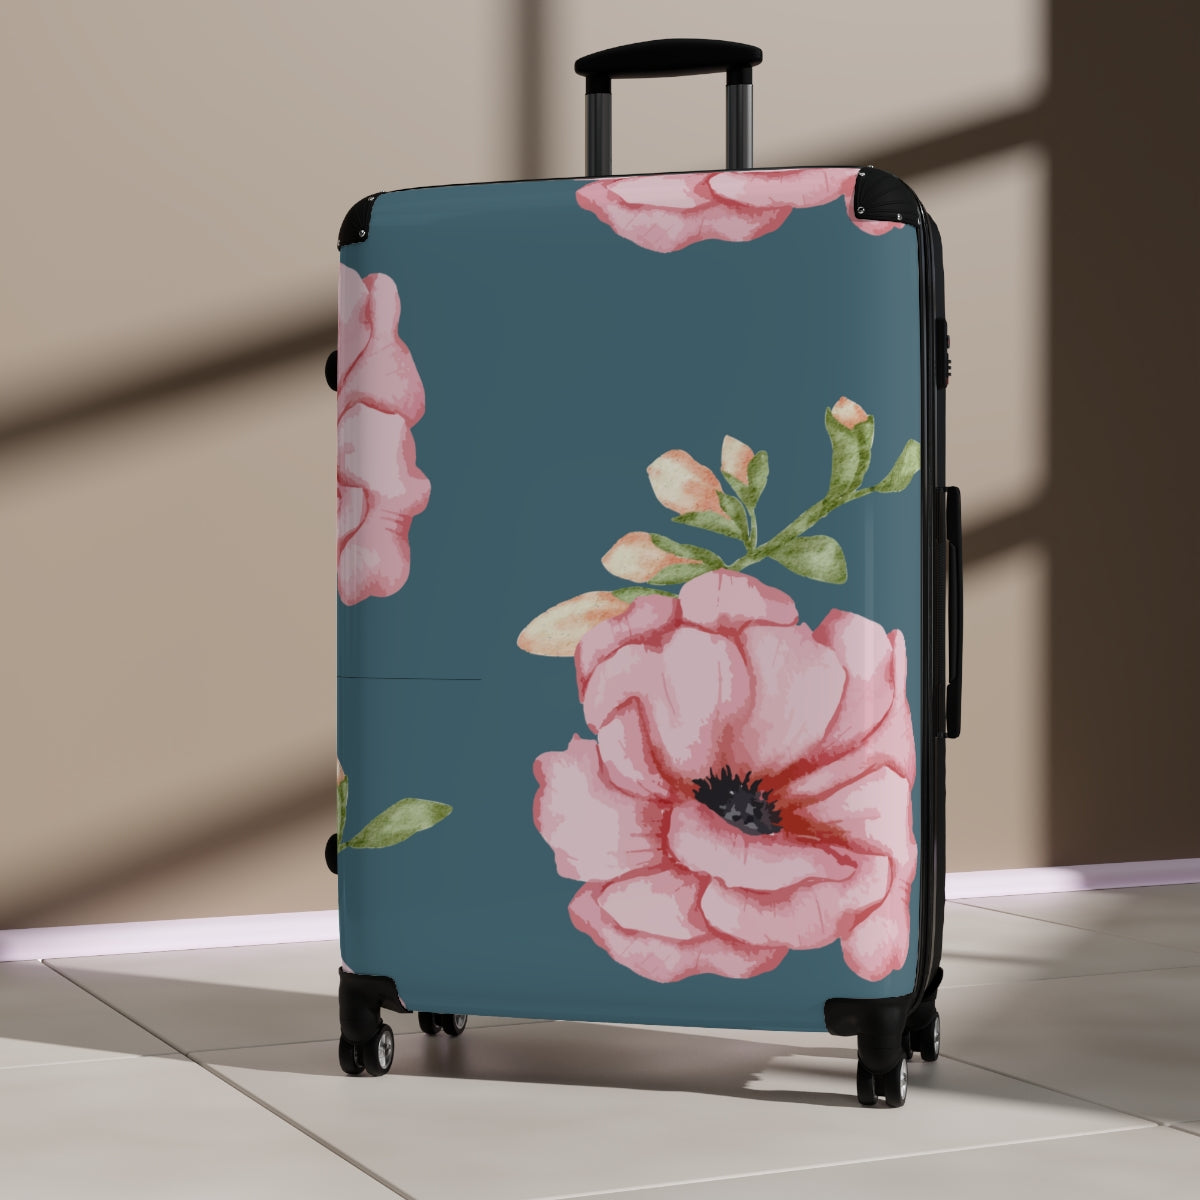 PINK FLORAL SUITCASE SET Artzira, Cabin Suitcase Carry-On Luggage, Trolly Travel Bags Double Wheeled Spinners, Women's Choice, Bridal Gift